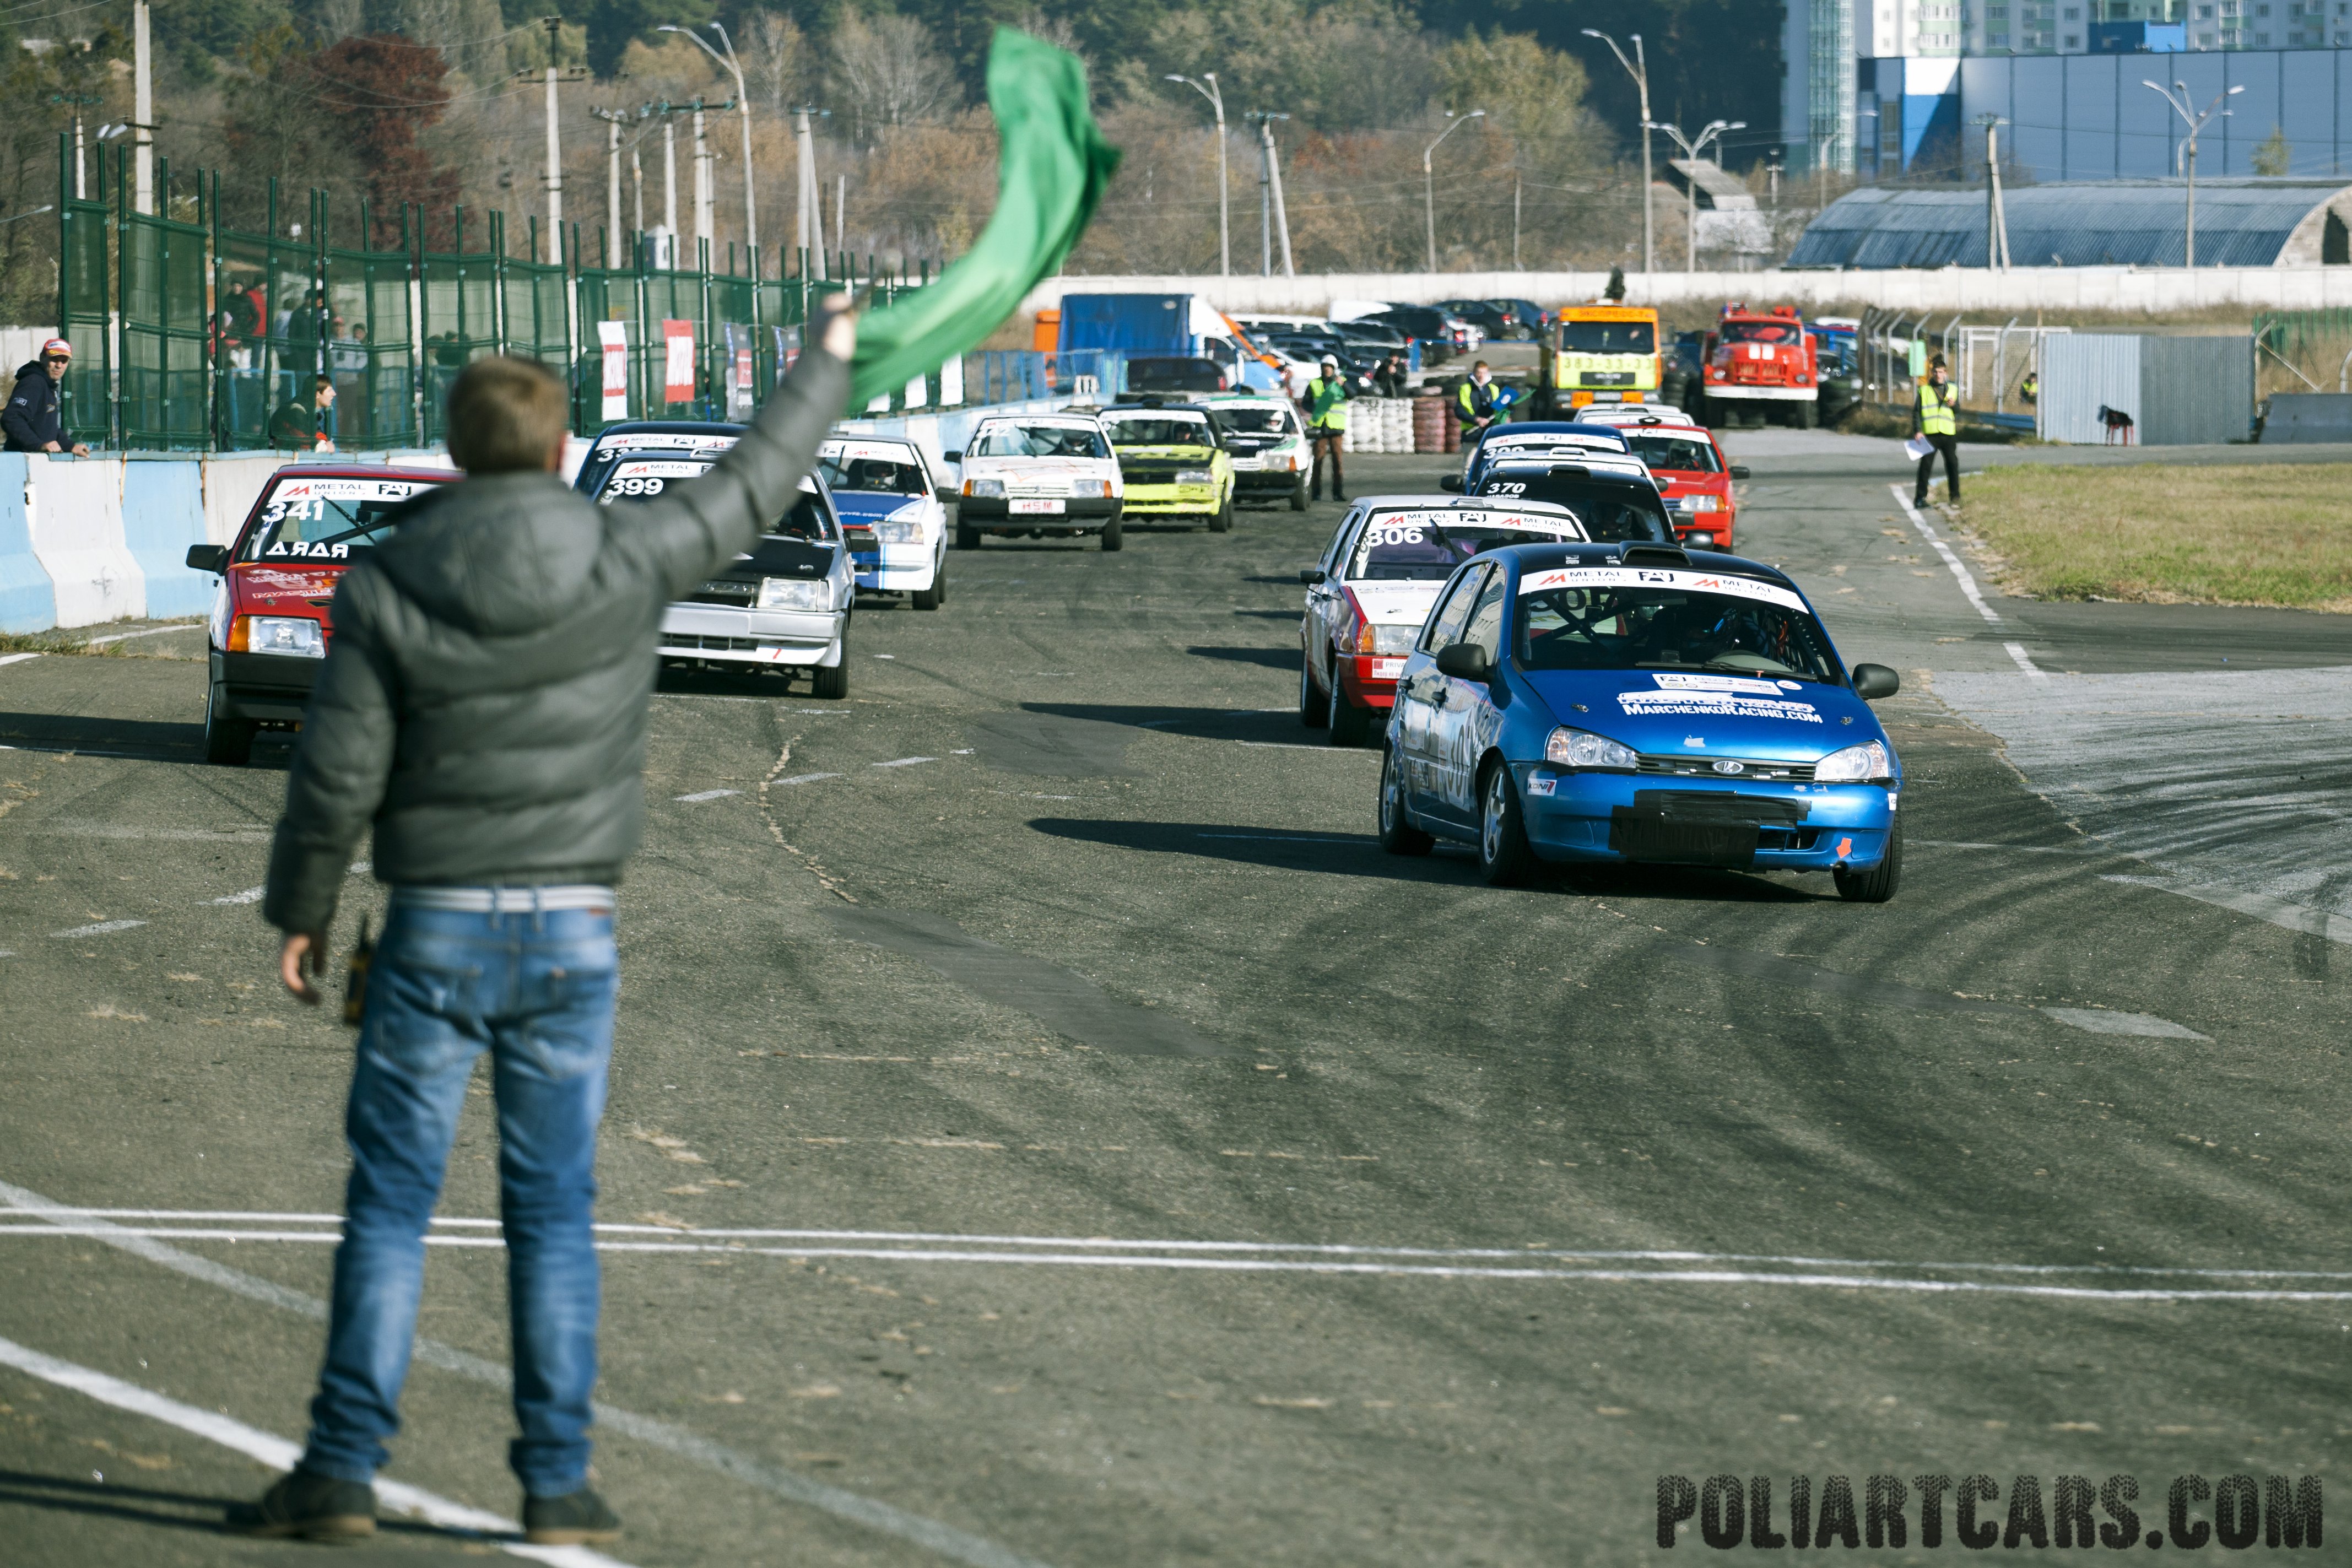 Ukraine Cup 2014 for Marchenko (large poliartcars)-9395